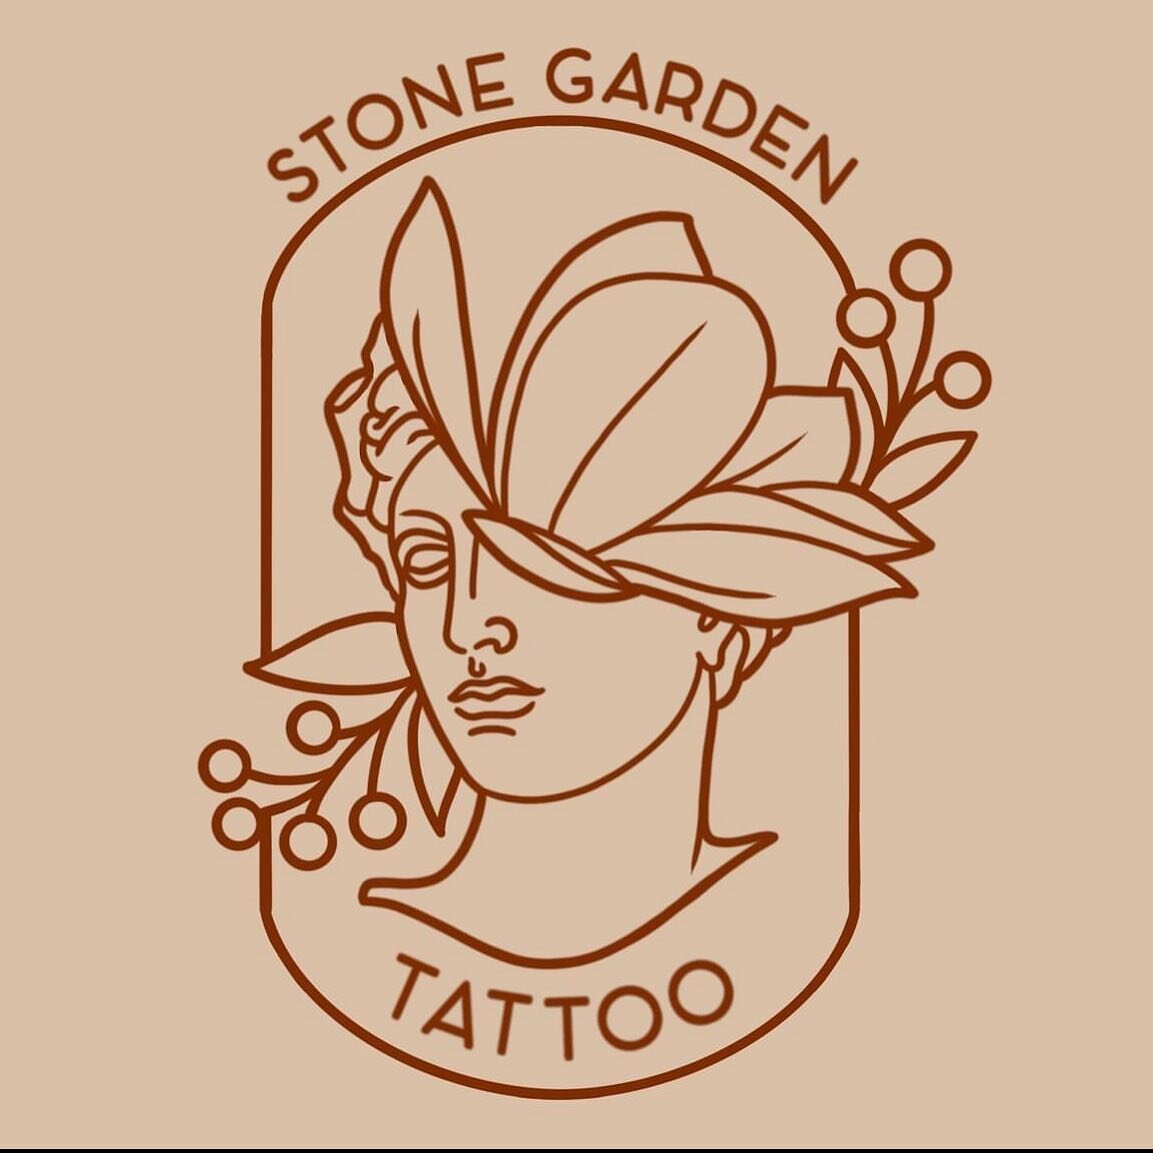 ✨ NEWS NEWS NEWS ✨

I am happy to announce that i will be starting with @stonegardentattoos August 15th in Calgary! I&rsquo;m super excited to share my new studio with all of you! 

i want to thank everyone who has stuck with me this far with my jour